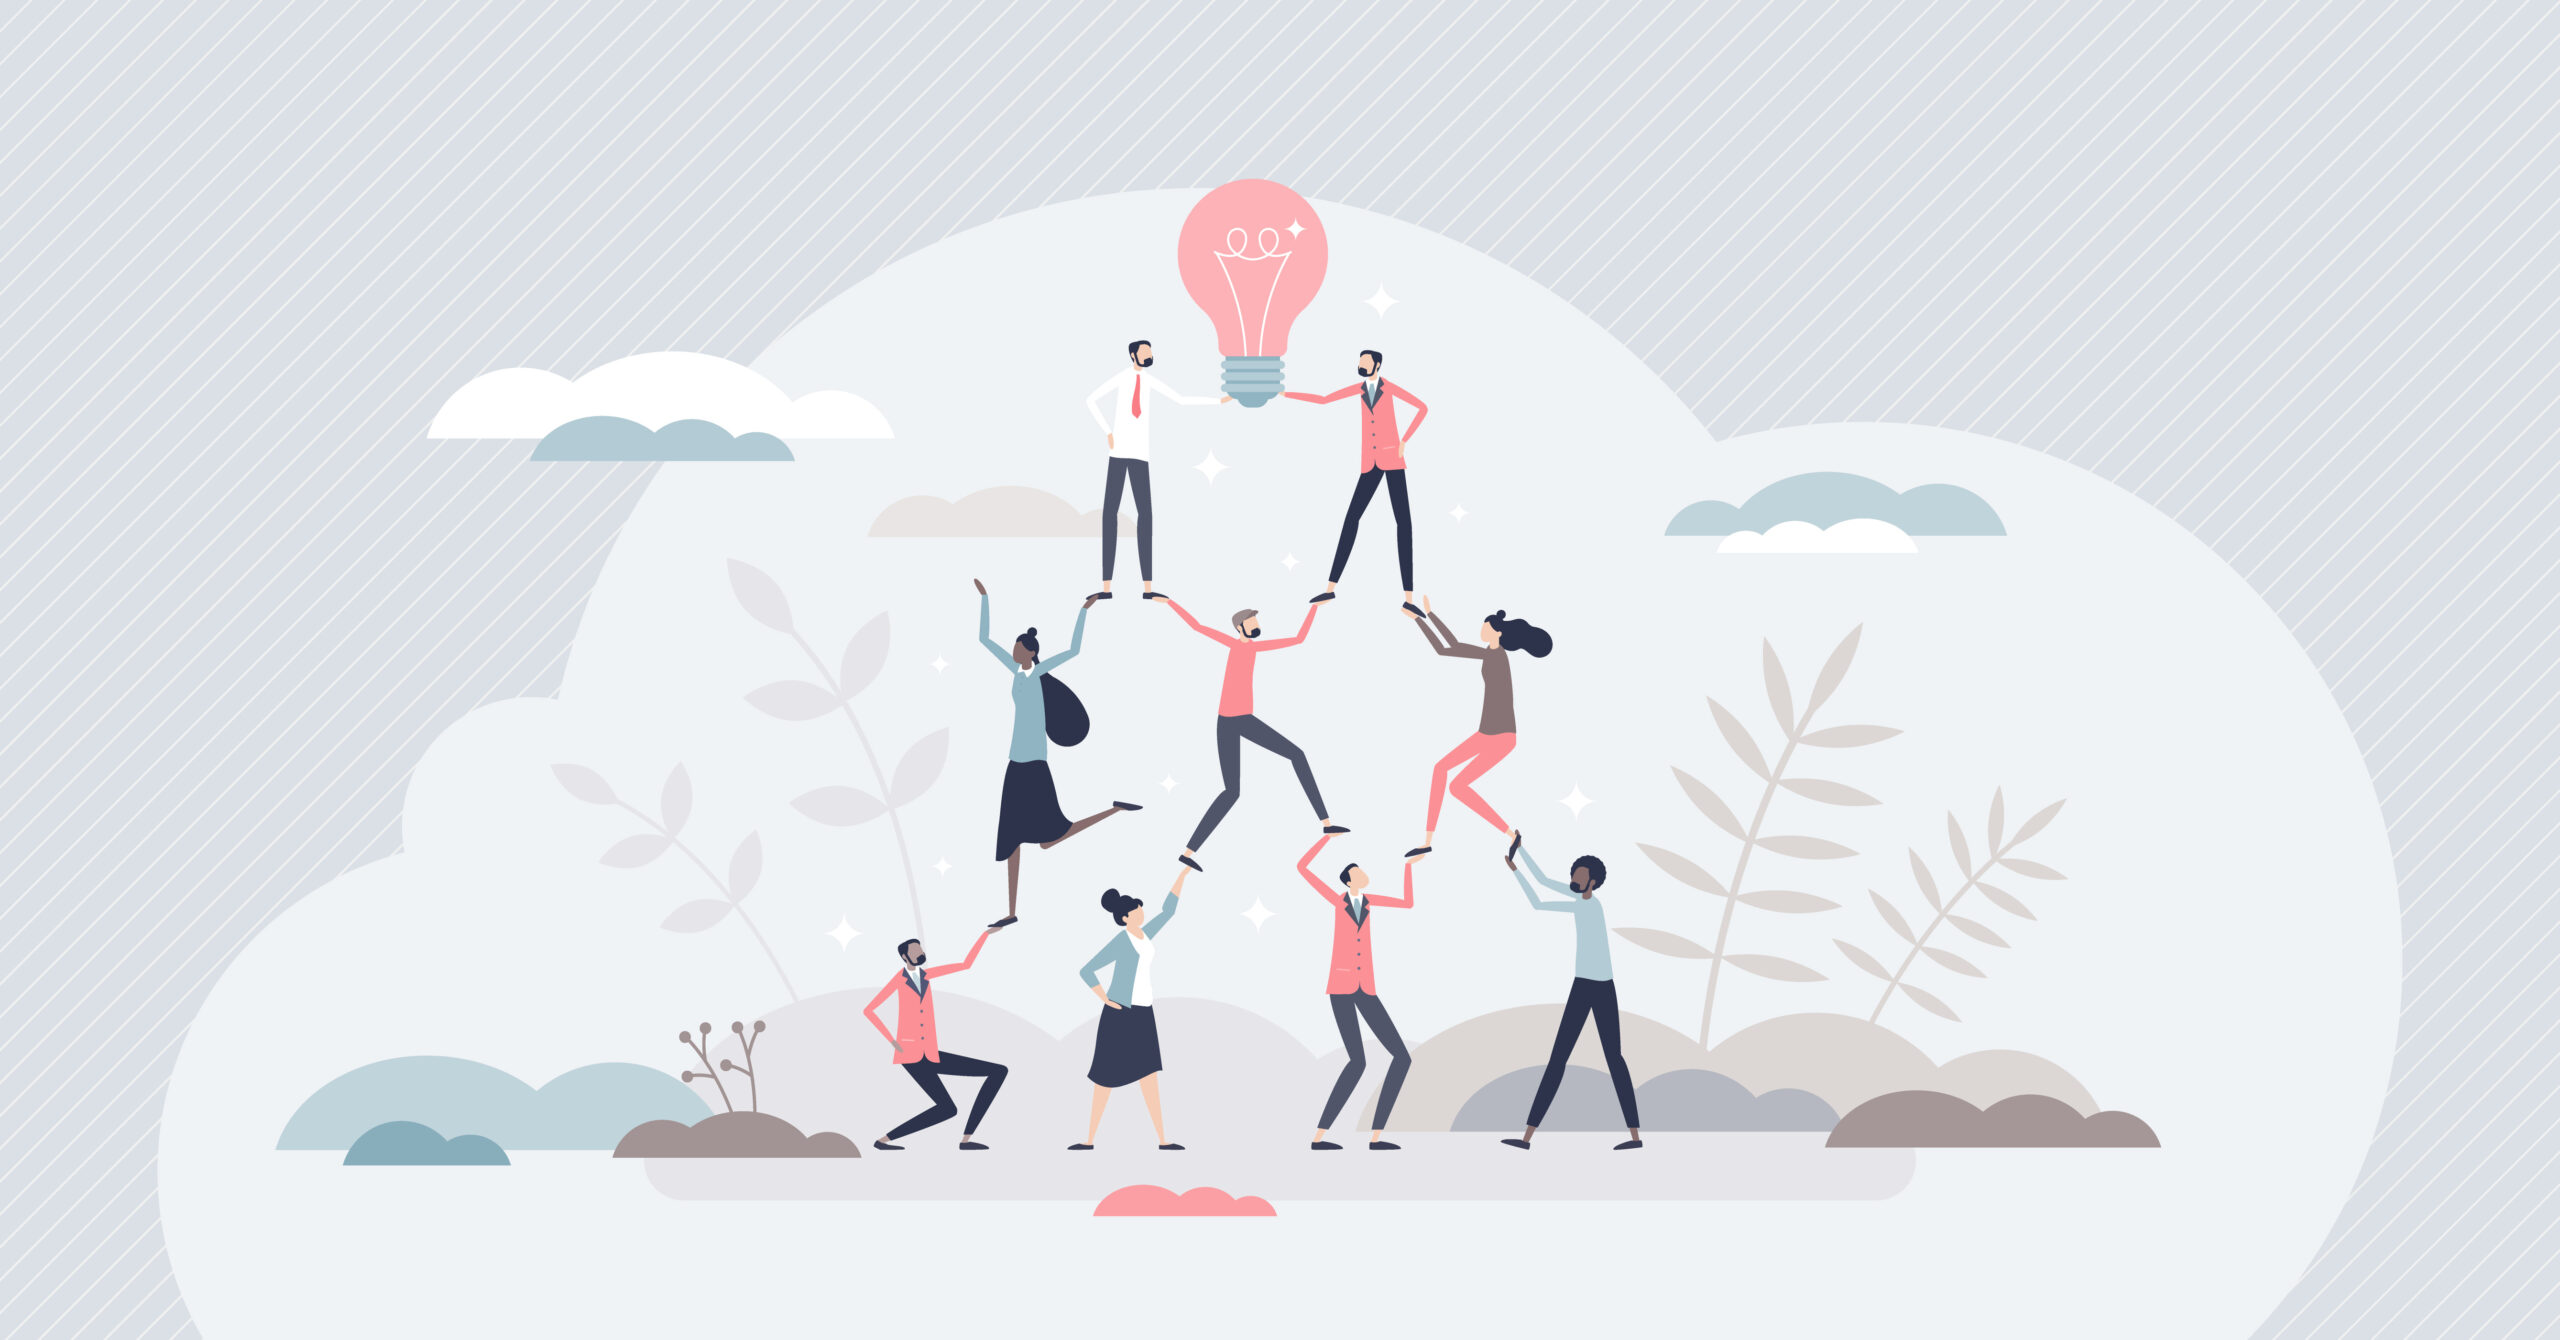 Fundraisers lifting each other up [Why Fundraising Needs to Embrace a More Collective Culture]